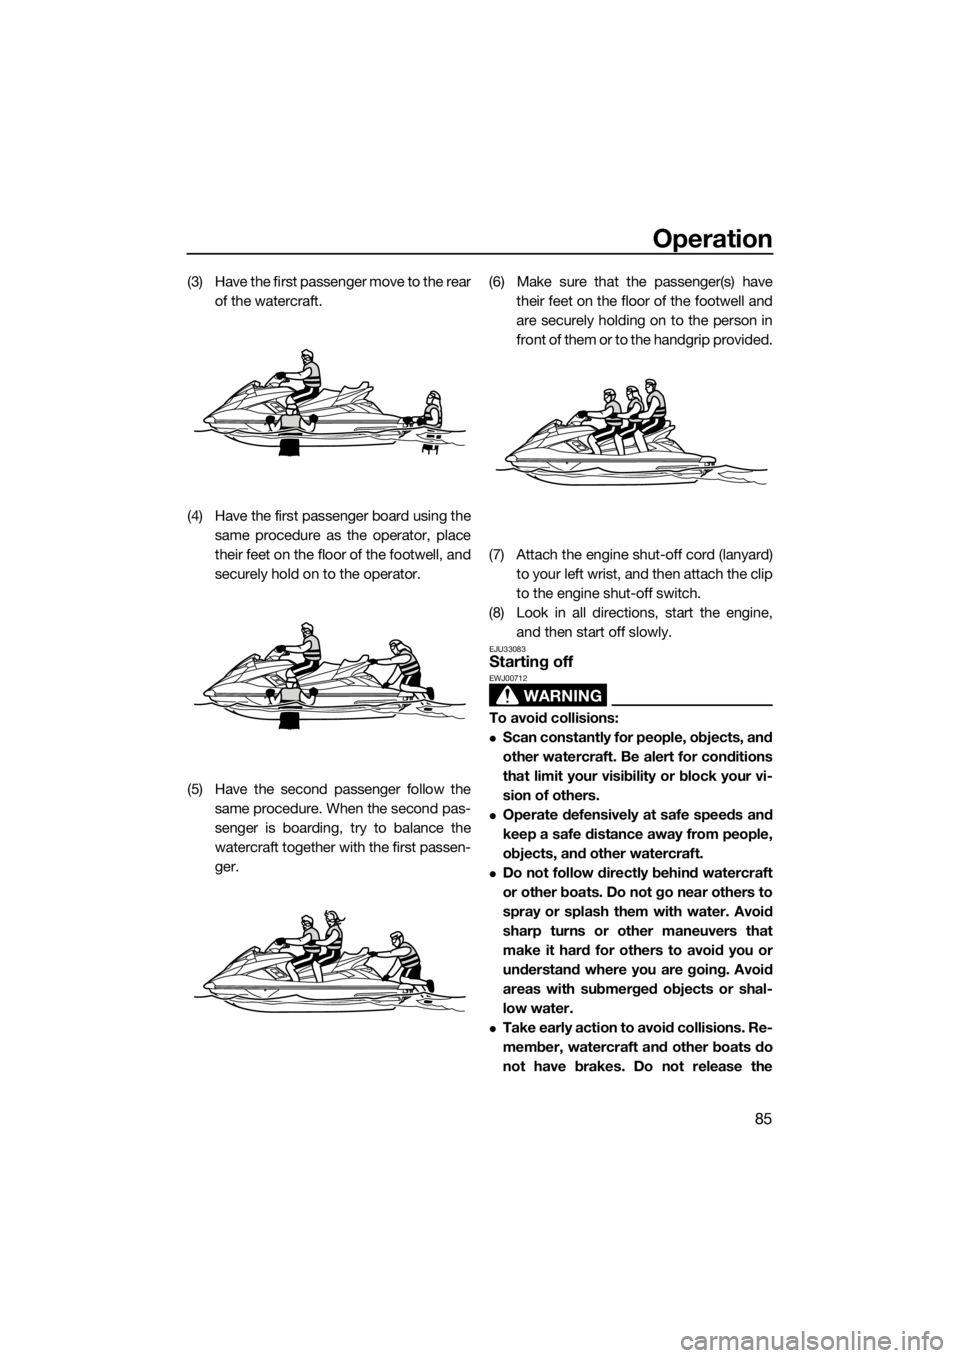 YAMAHA FX SVHO 2016  Owners Manual Operation
85
(3) Have the first passenger move to the rear
of the watercraft.
(4) Have the first passenger board using the
same procedure as the operator, place
their feet on the floor of the footwell